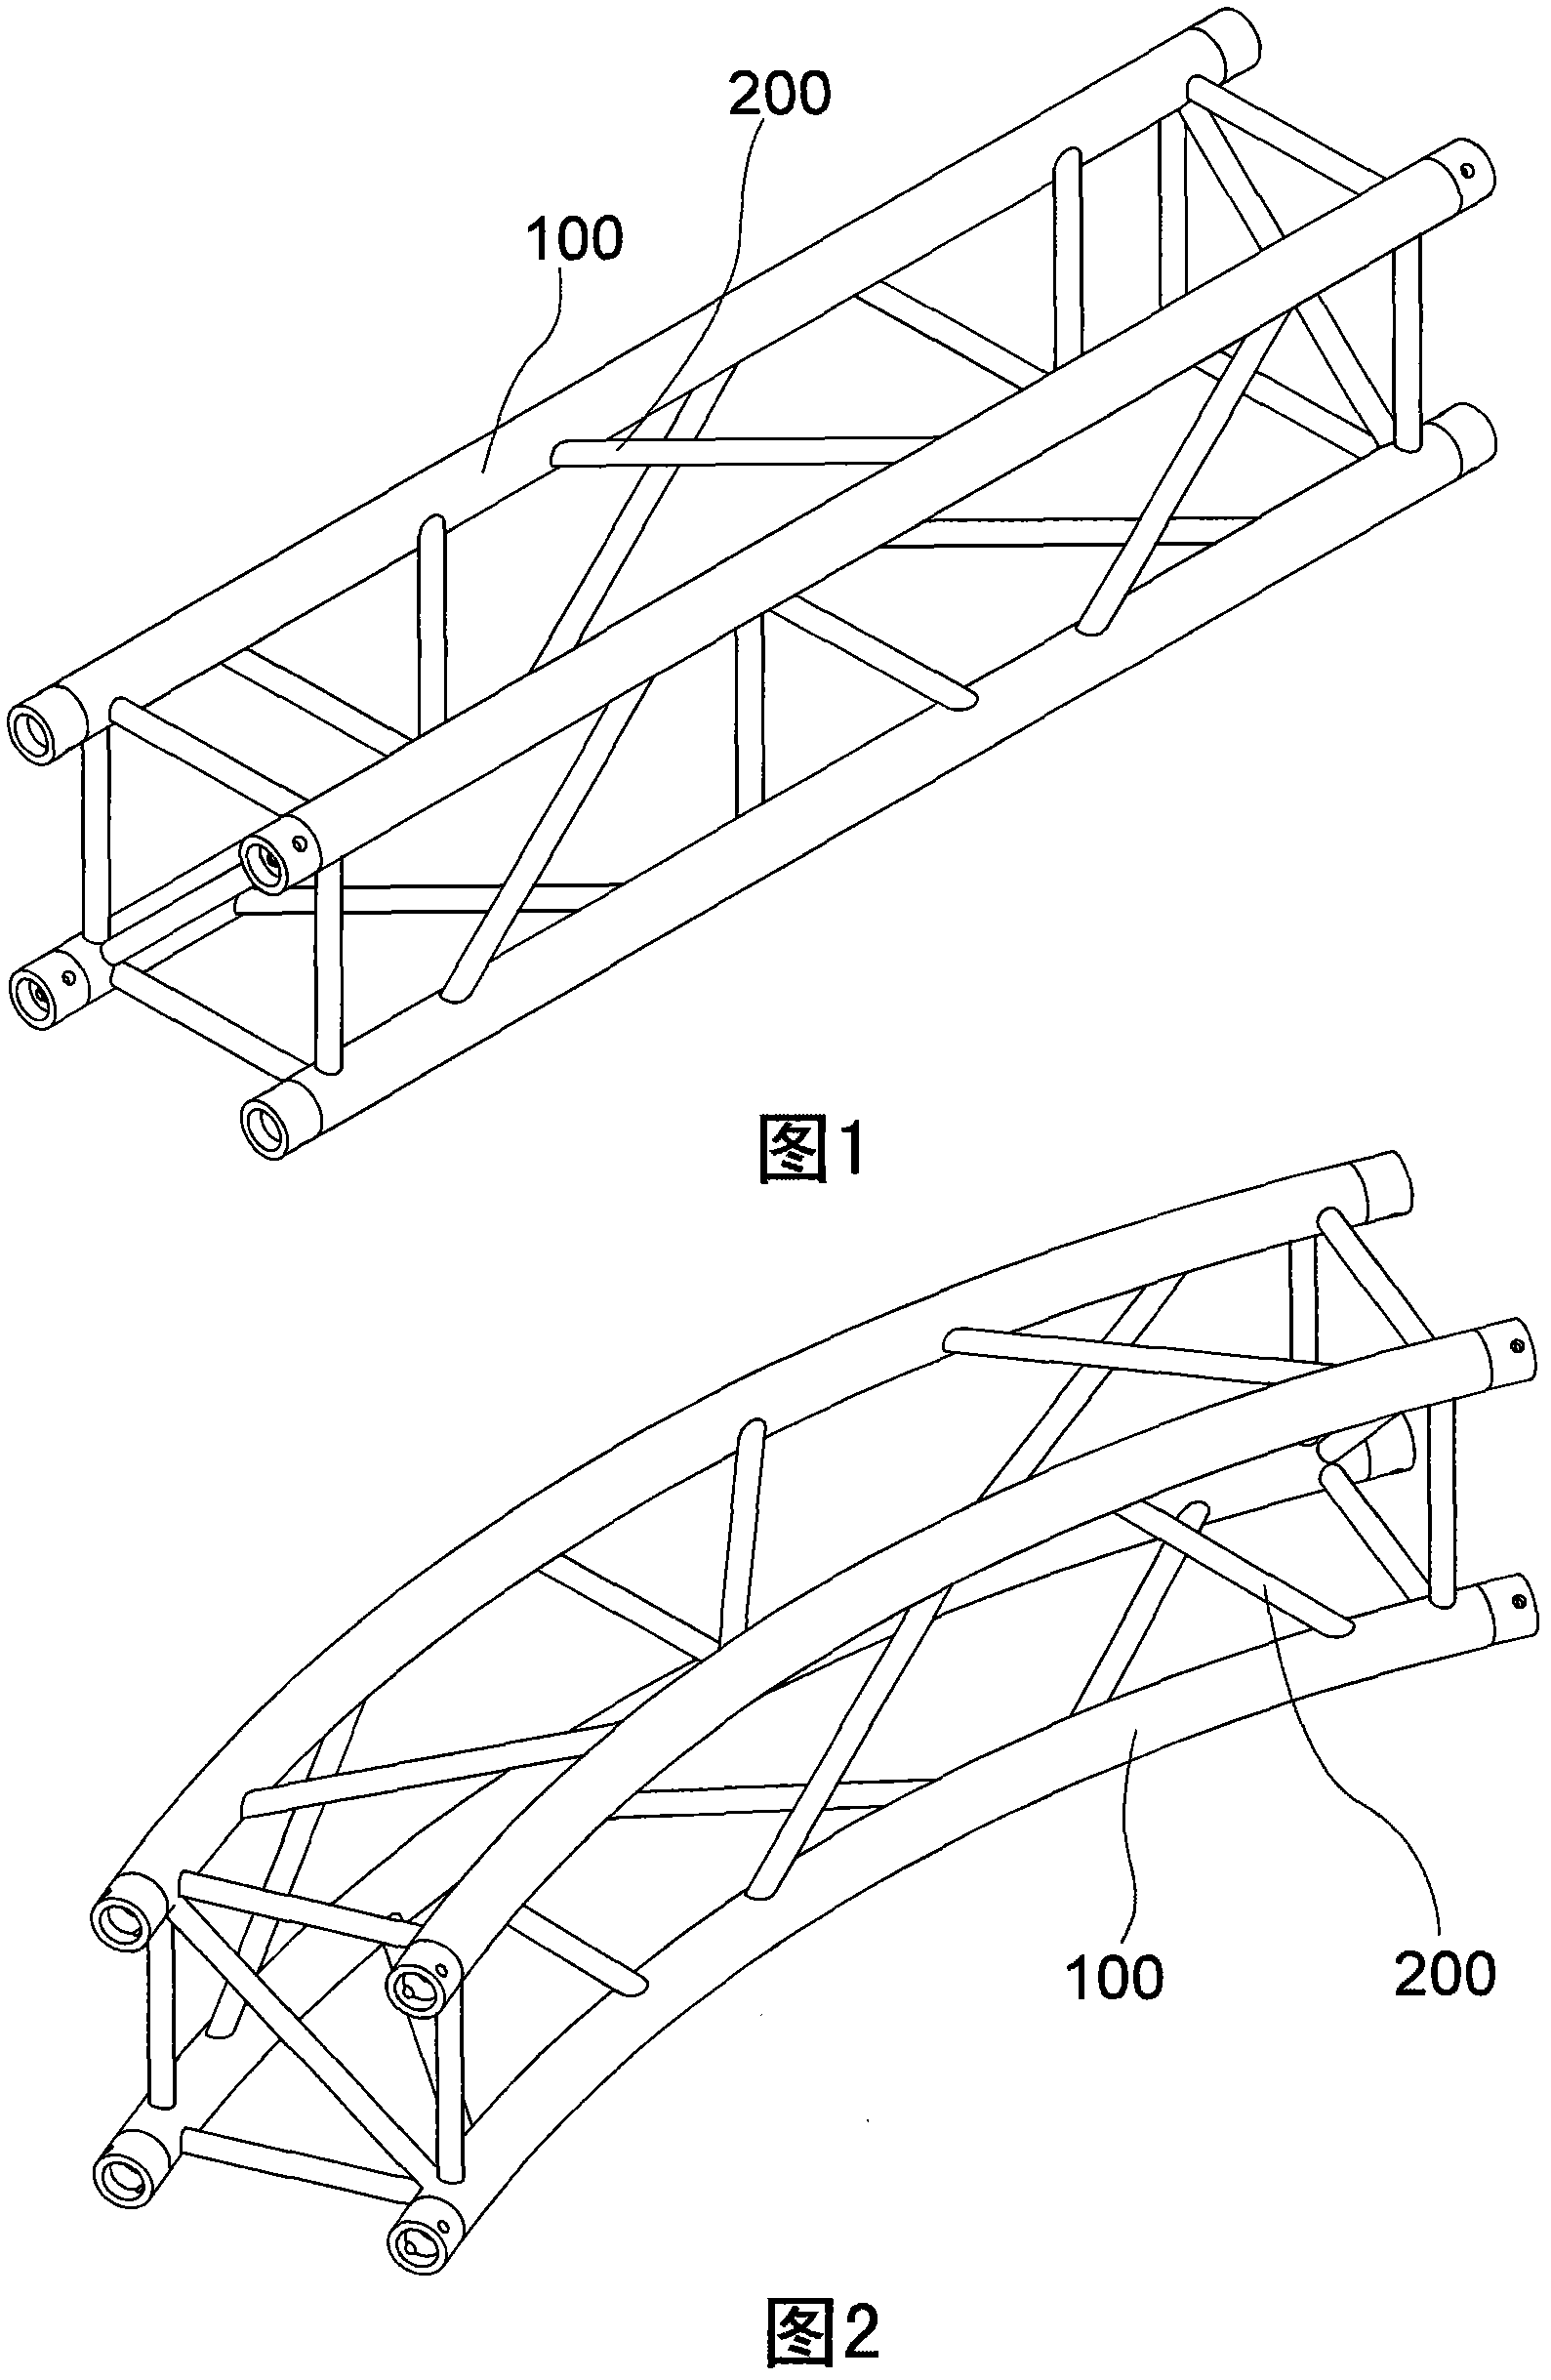 Truss connection device